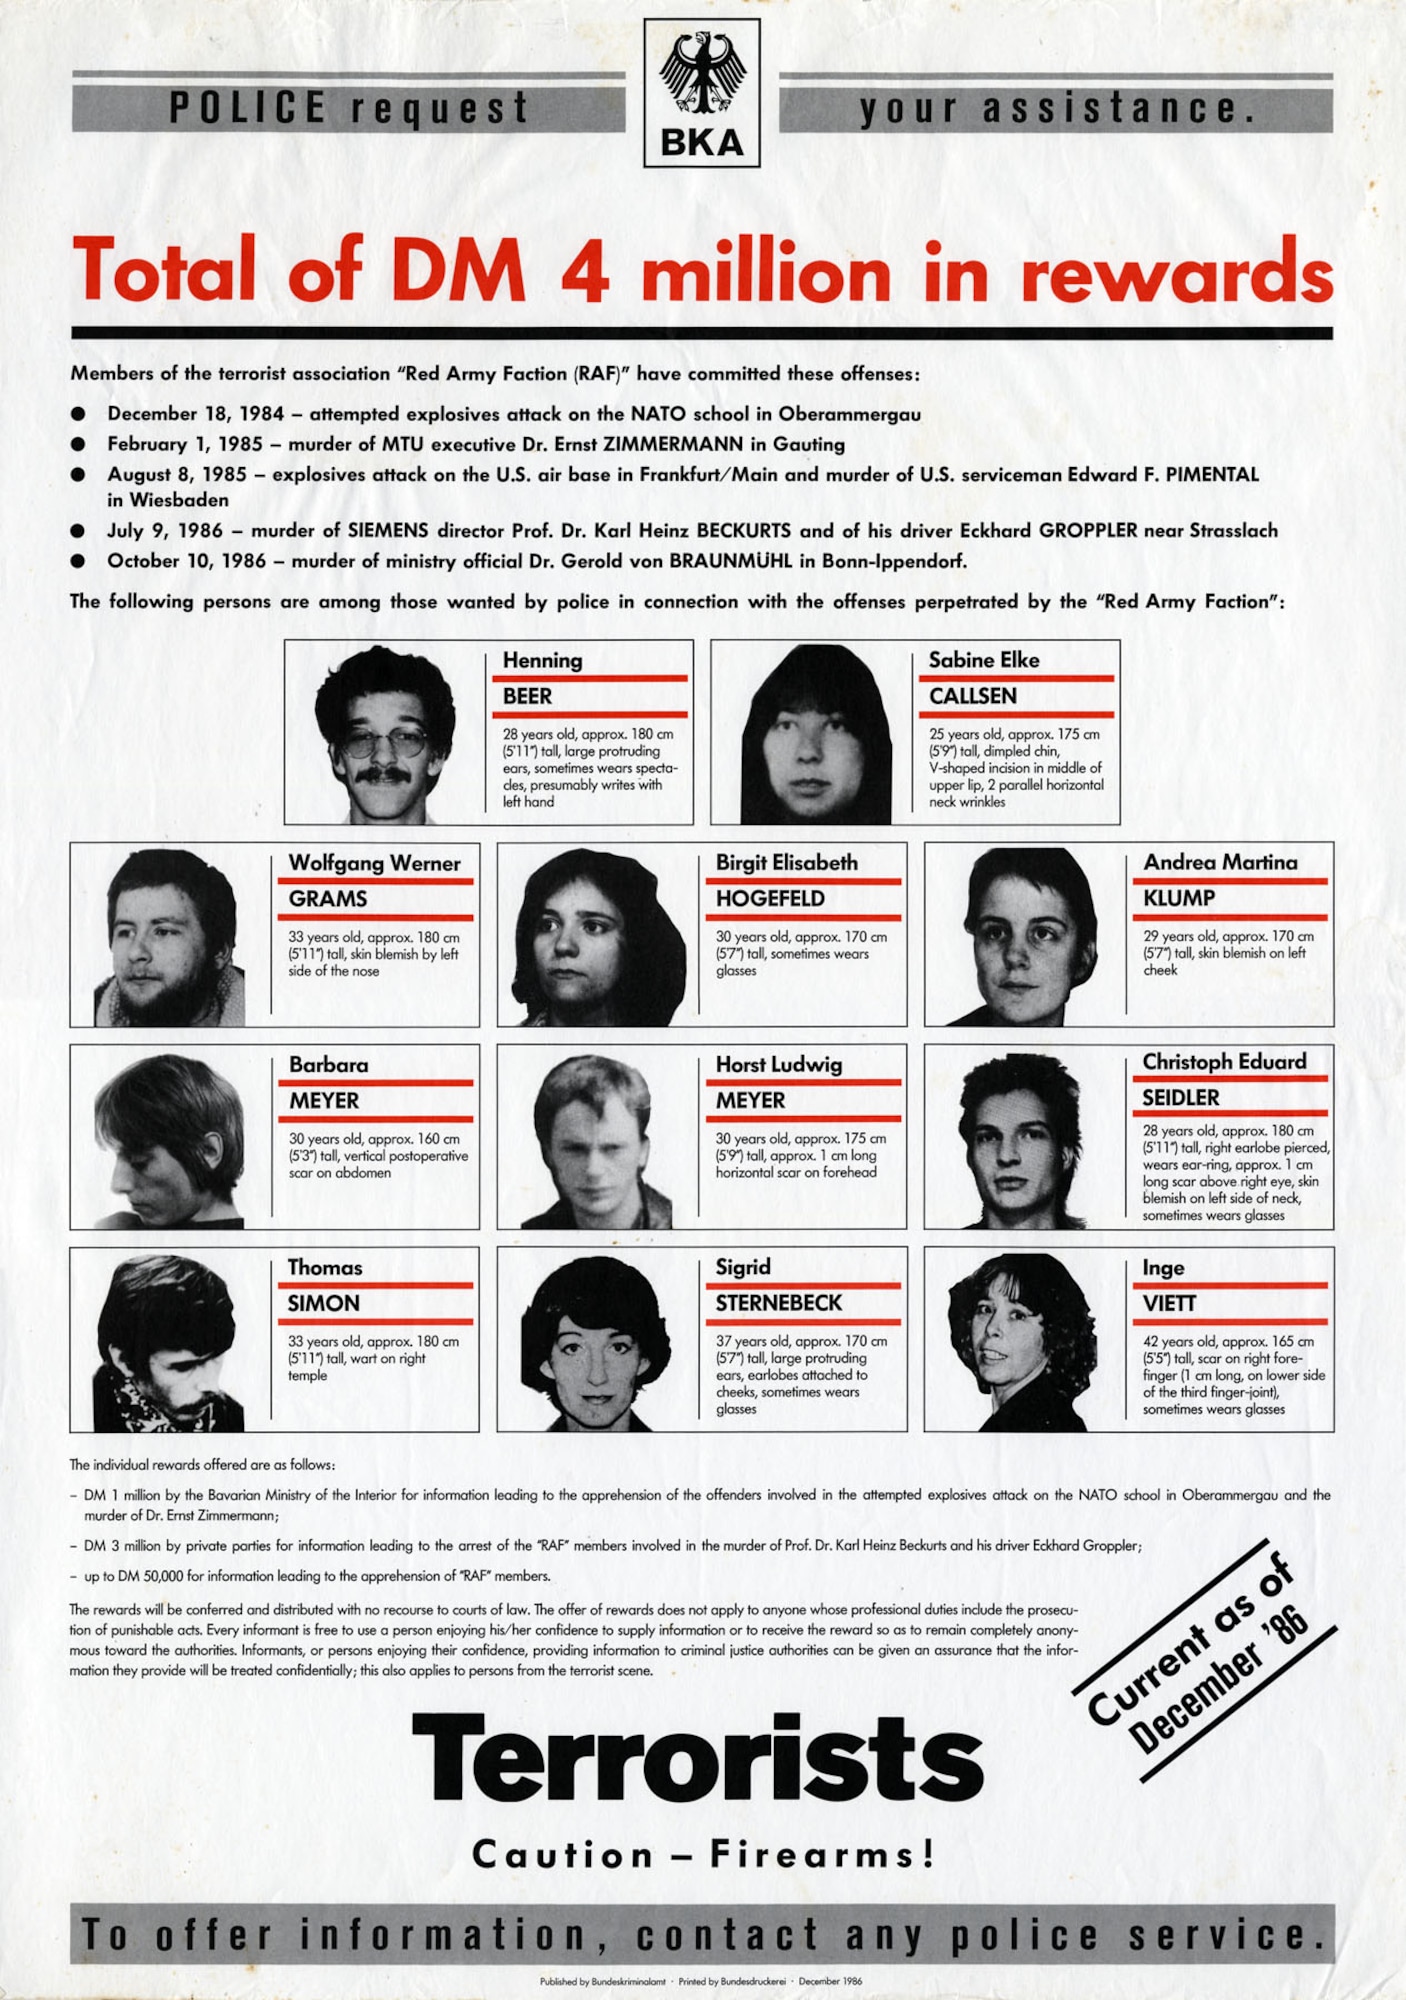 This German police poster offers rewards for the capture of Red Army Faction terrorists -- also known as the Baader Meinhof gang -- who were wanted for several political bombings and murders in Germany. (U.S. Air Force photo)